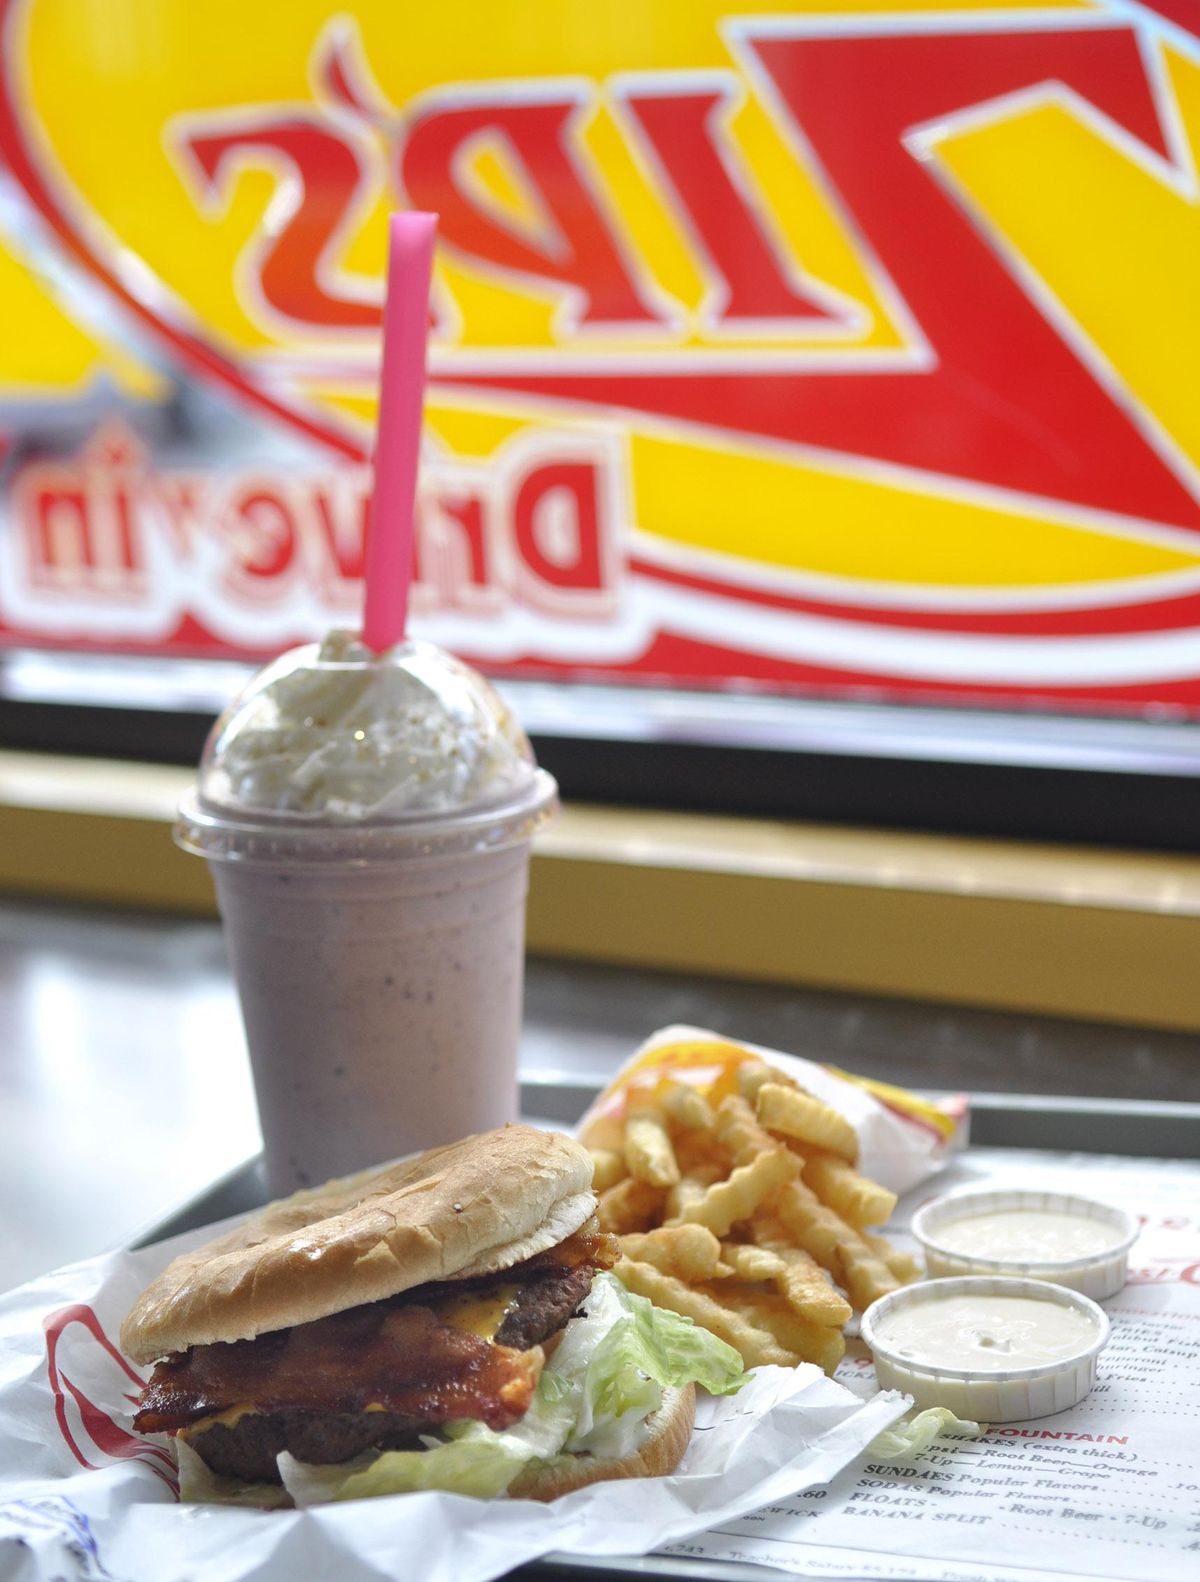 Zip’s is an Inland Northwest institution, known for classic fast-food staples such as burgers, shakes and fries. (Adriana Janovich / The Spokesman-Review)